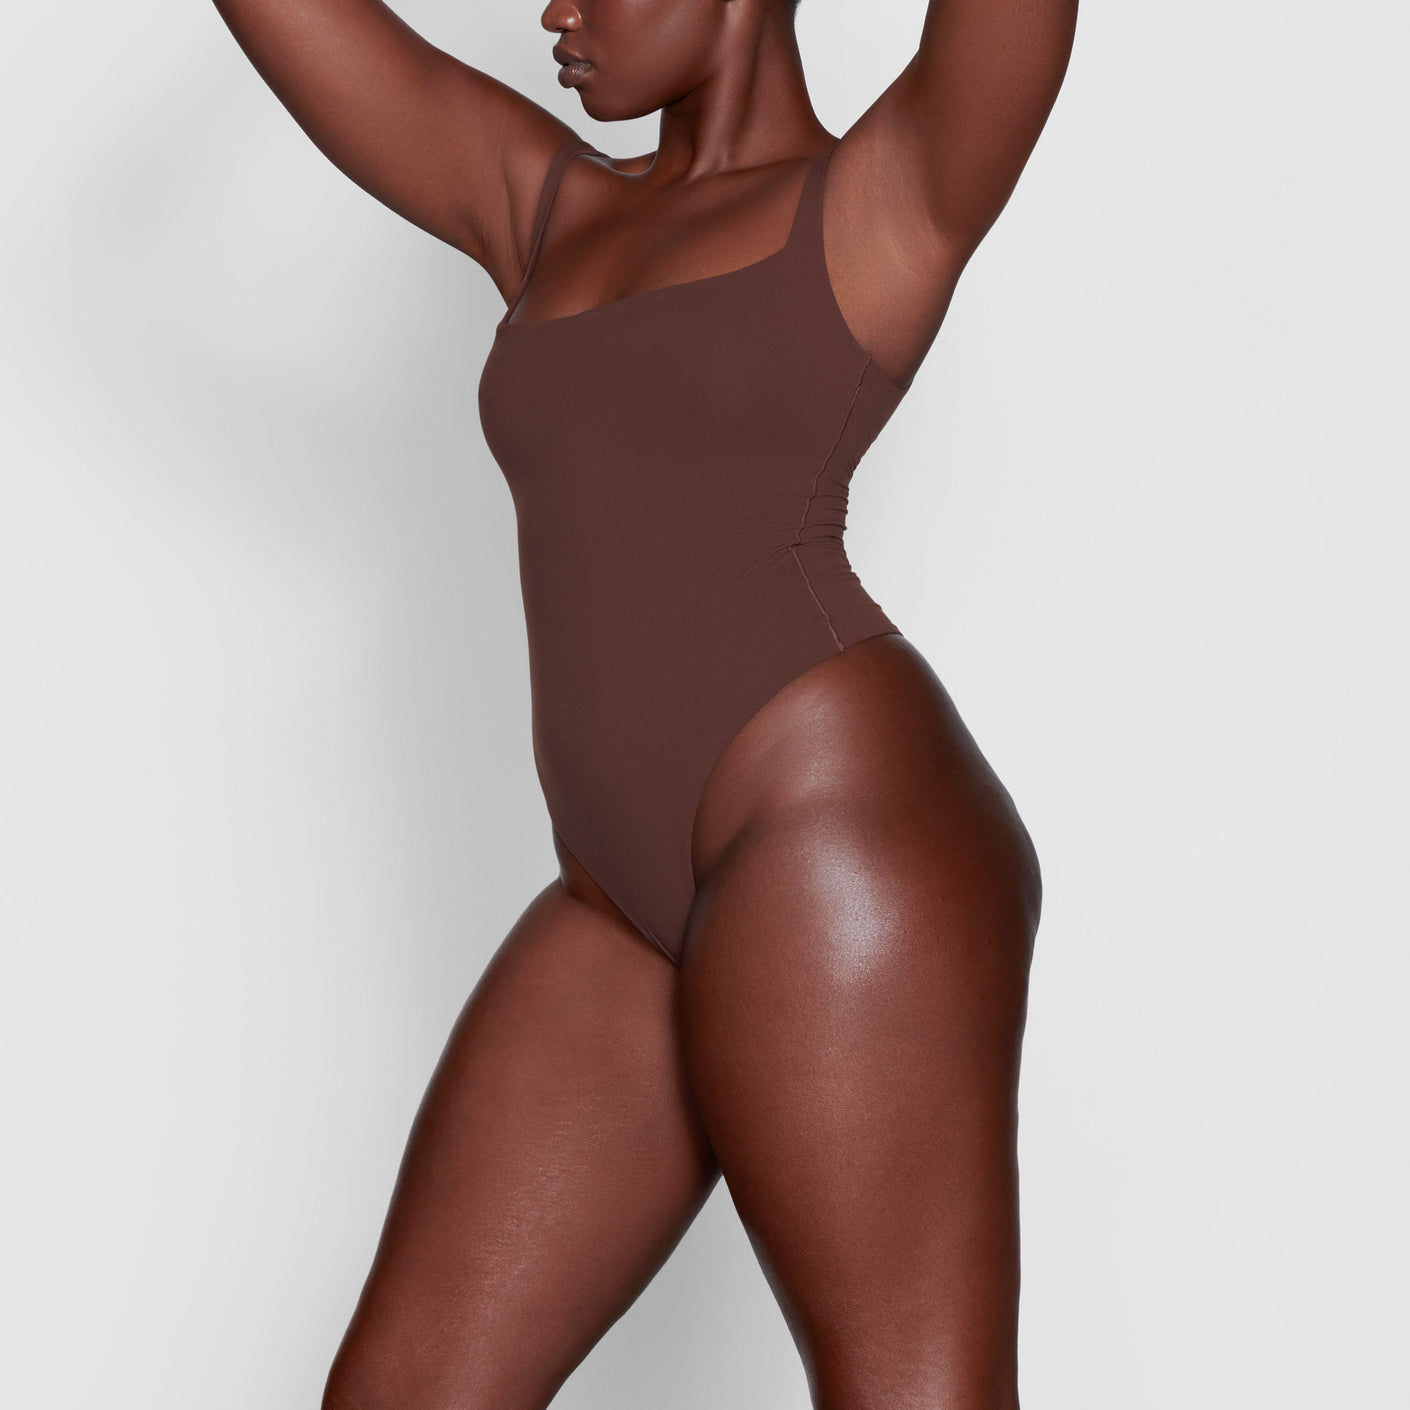 A bodysuit like chocolate, which one do you want? #oqq #bodysuit